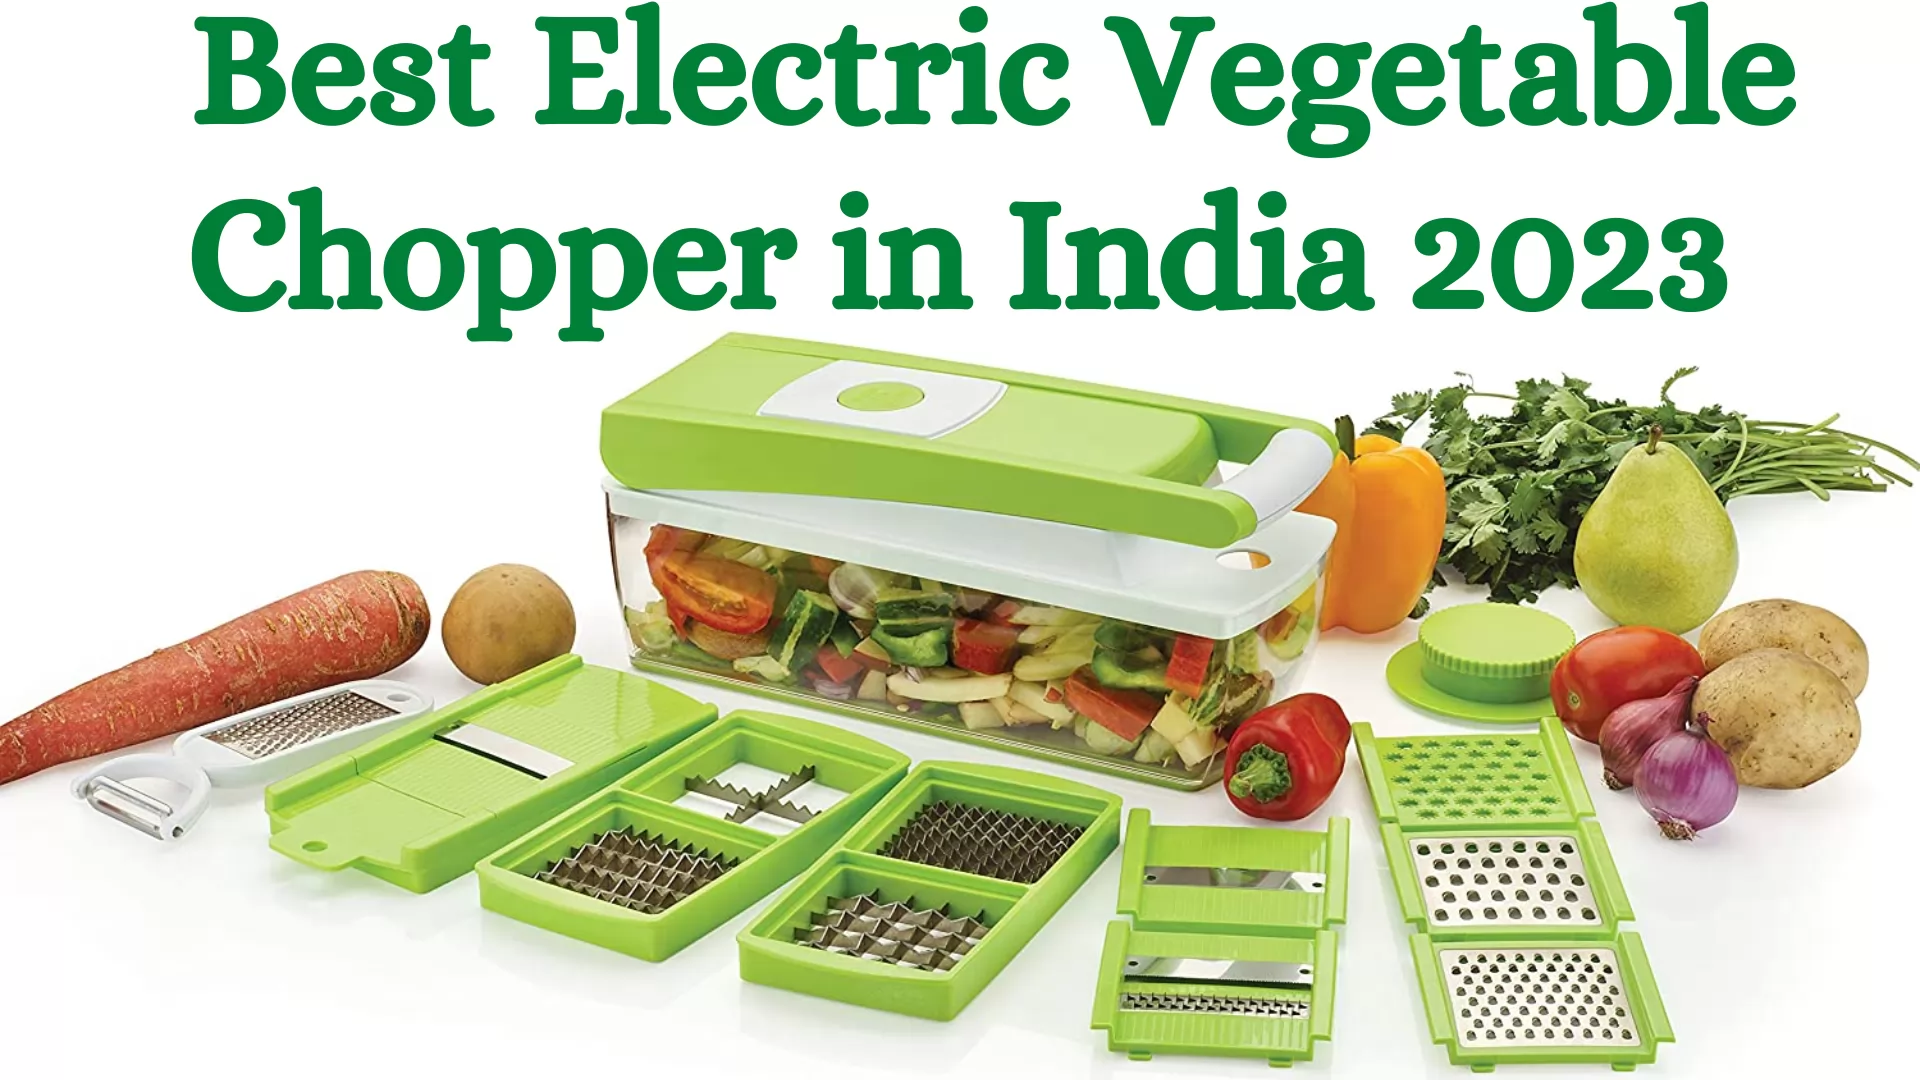 Best Electric Vegetable Chopper in India